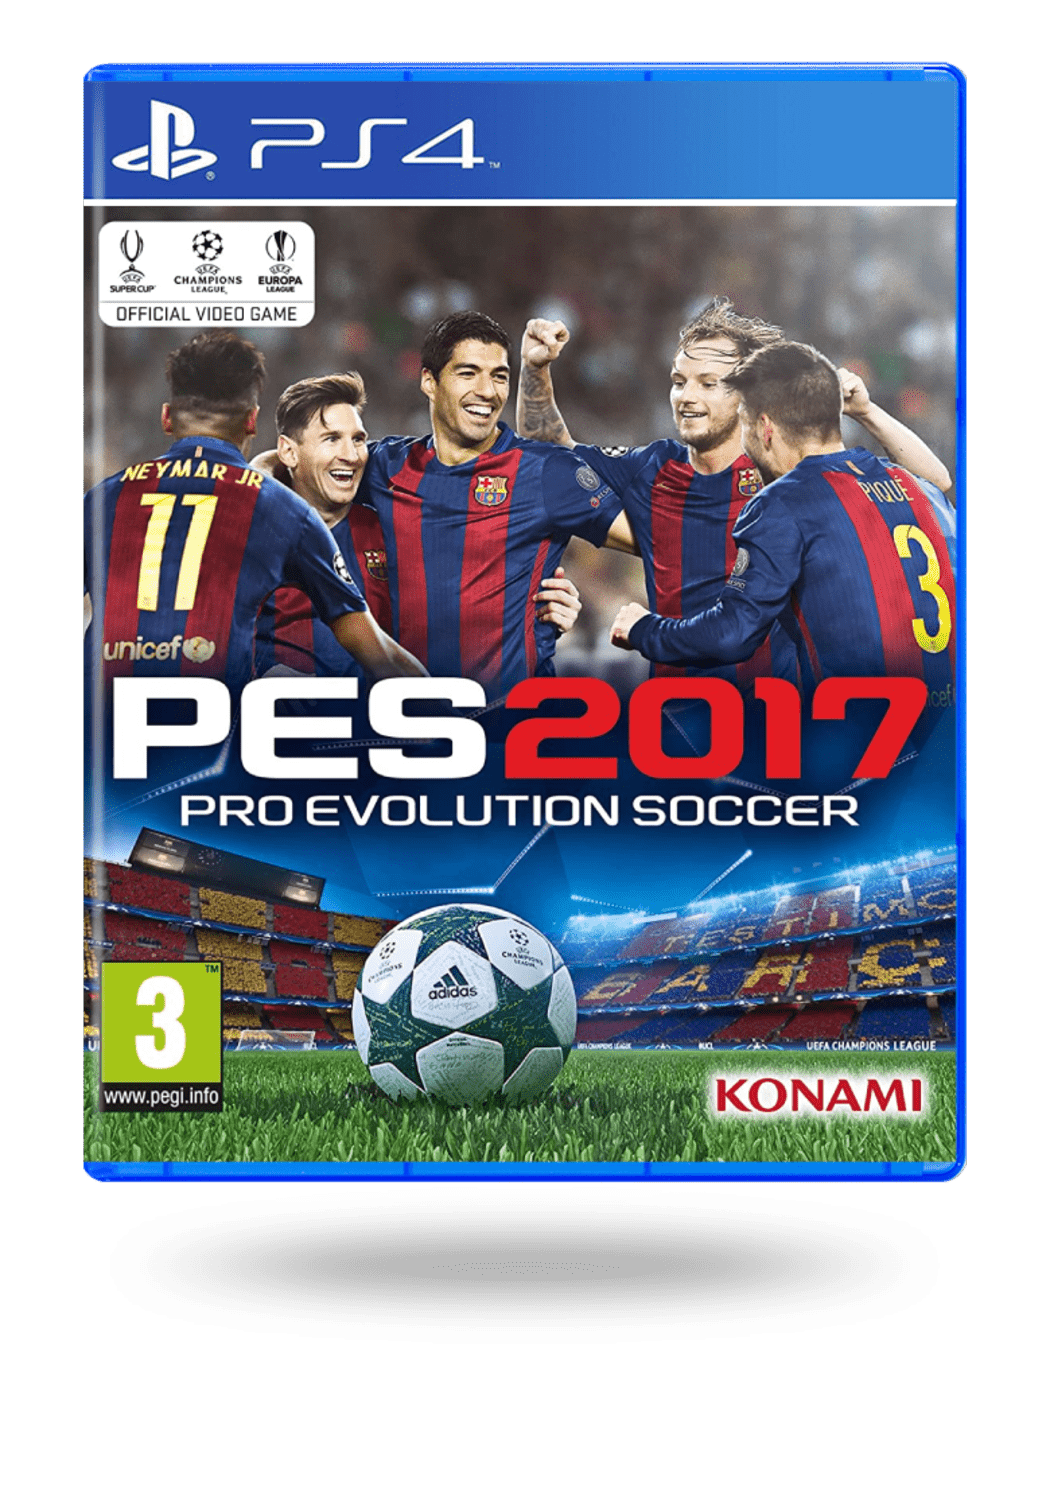 PES 2017, For Android, PES 17 Mobile Game